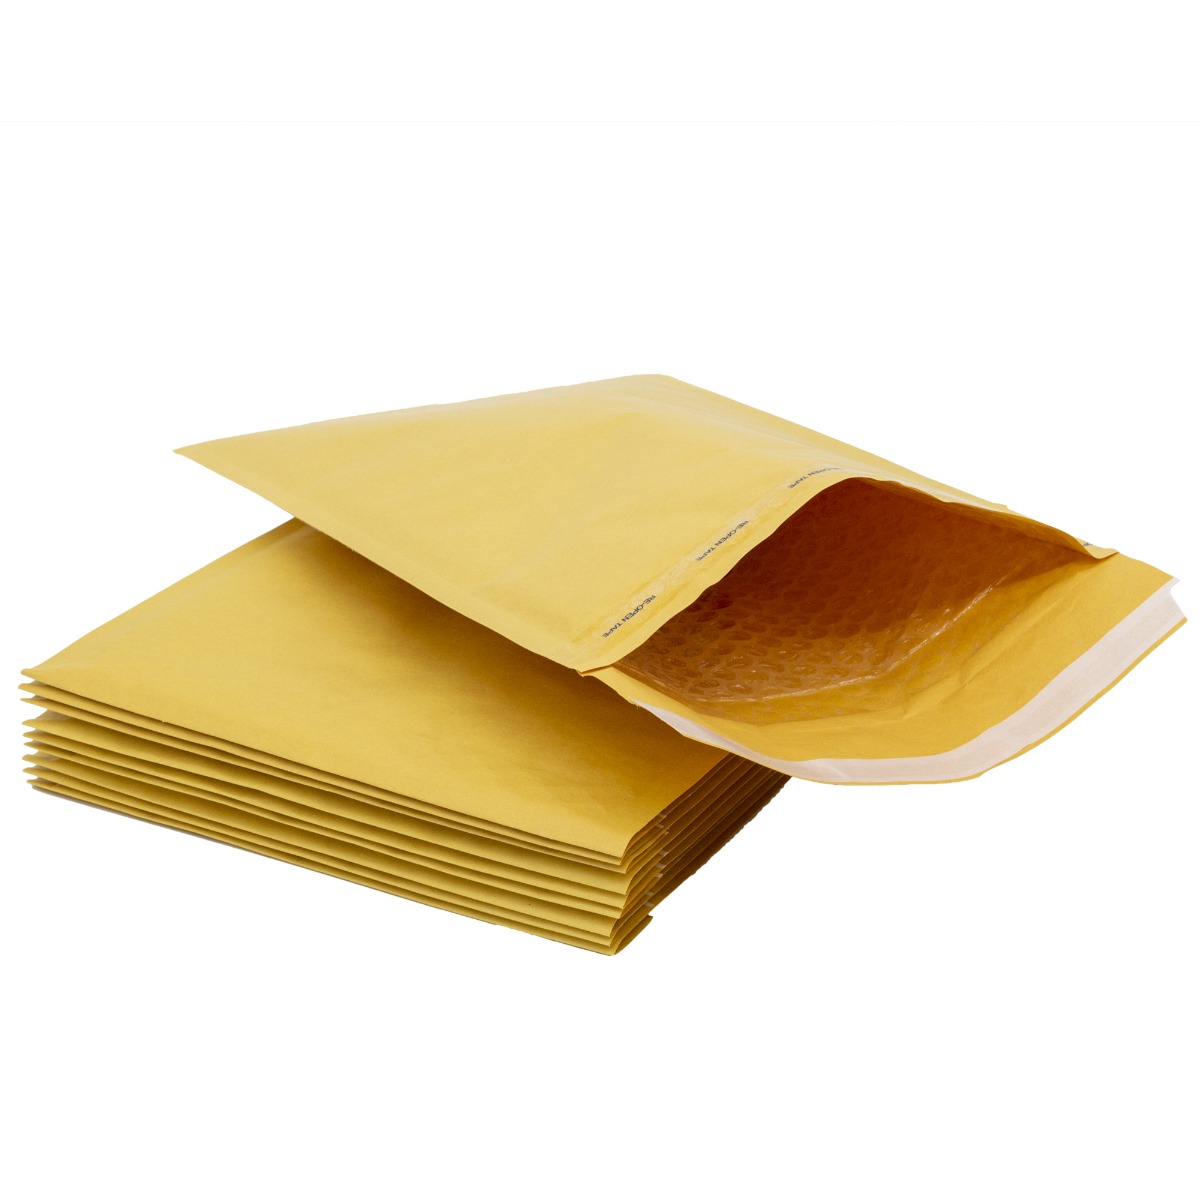 MIMA TRADING - Manilla Paper (Envelope Paper) 70 G.S.M AVAILABLE !!!  Contact us for more details #paper #papers #manilla #envelope #envelopes  #gsm